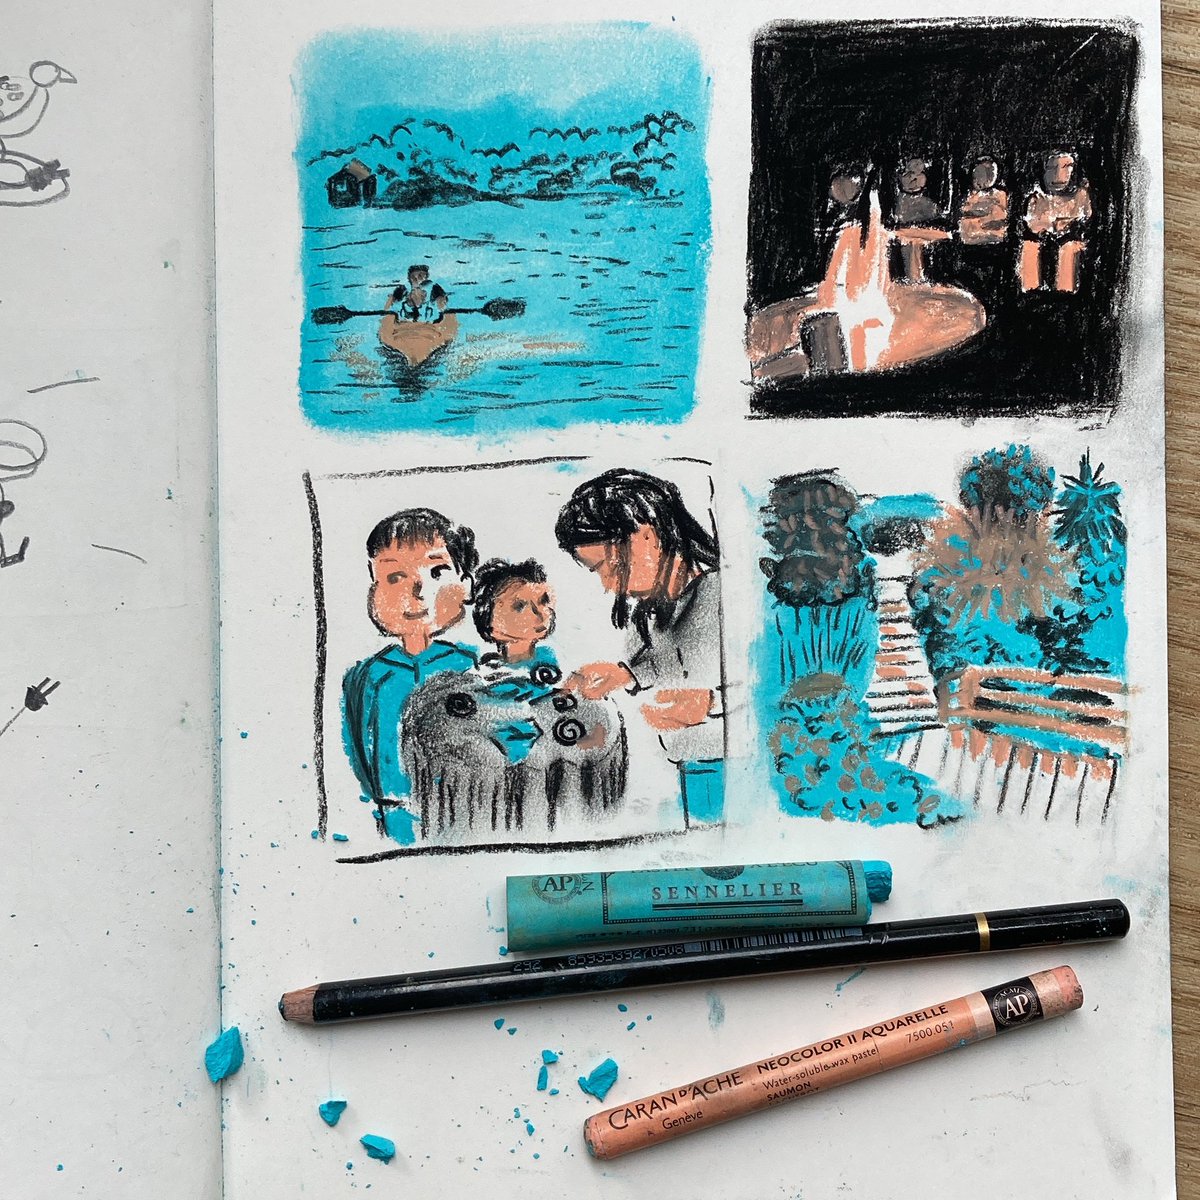 I’ve been doing the #3materialsdrawingchallenge on instagram for the past 5 weeks. 3 materials are used for a 30 minute sketch. It has been a great excuse to play. Playing is so important. And it’s been a welcome distraction as I wait on responses to queries. #kidlitart #sketch